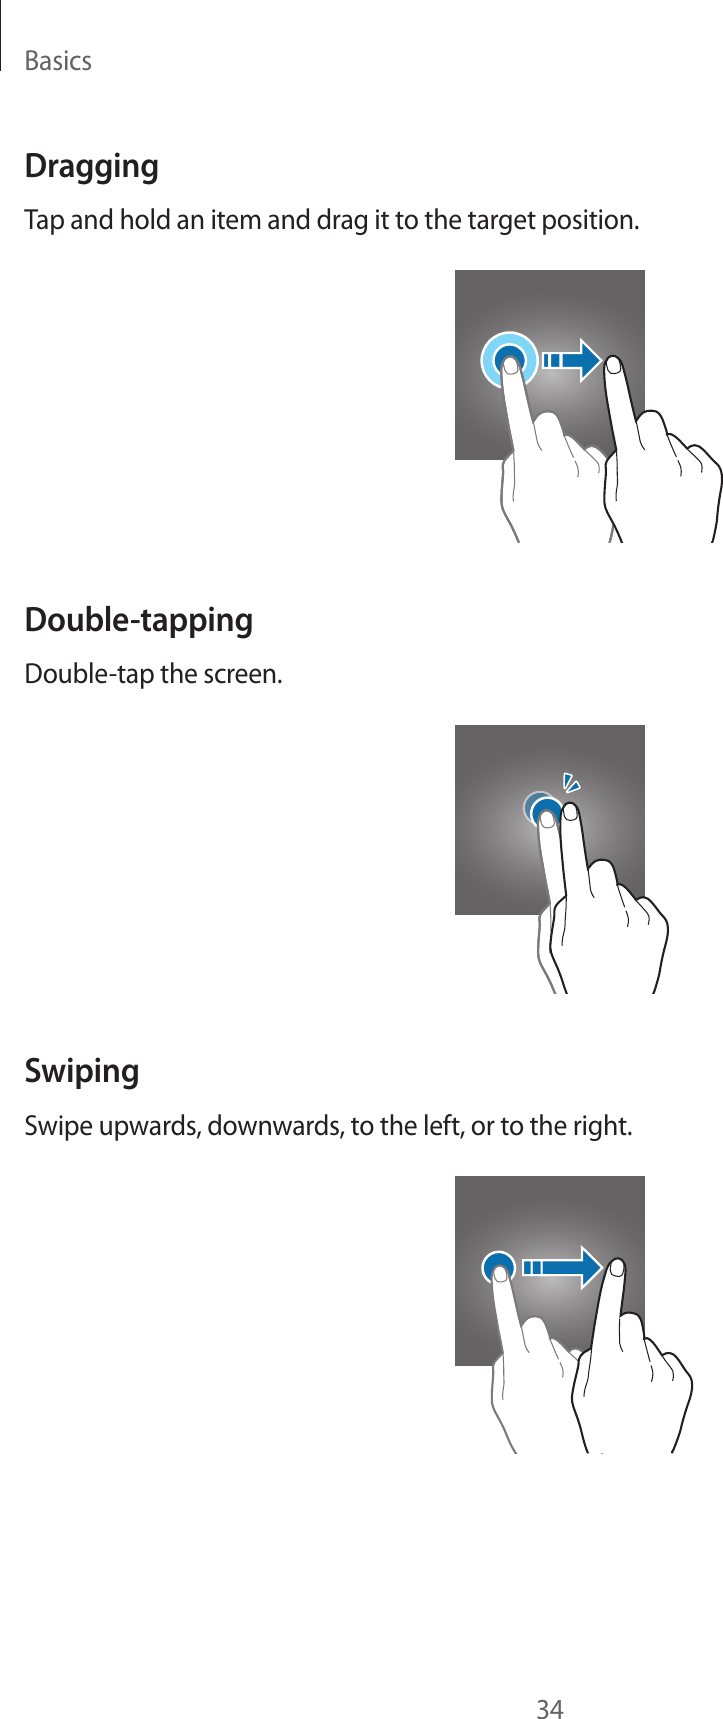 Basics34DraggingTap and hold an item and drag it to the target position.Double-tappingDouble-tap the screen.SwipingSwipe upwards, downwards, to the left, or to the right.